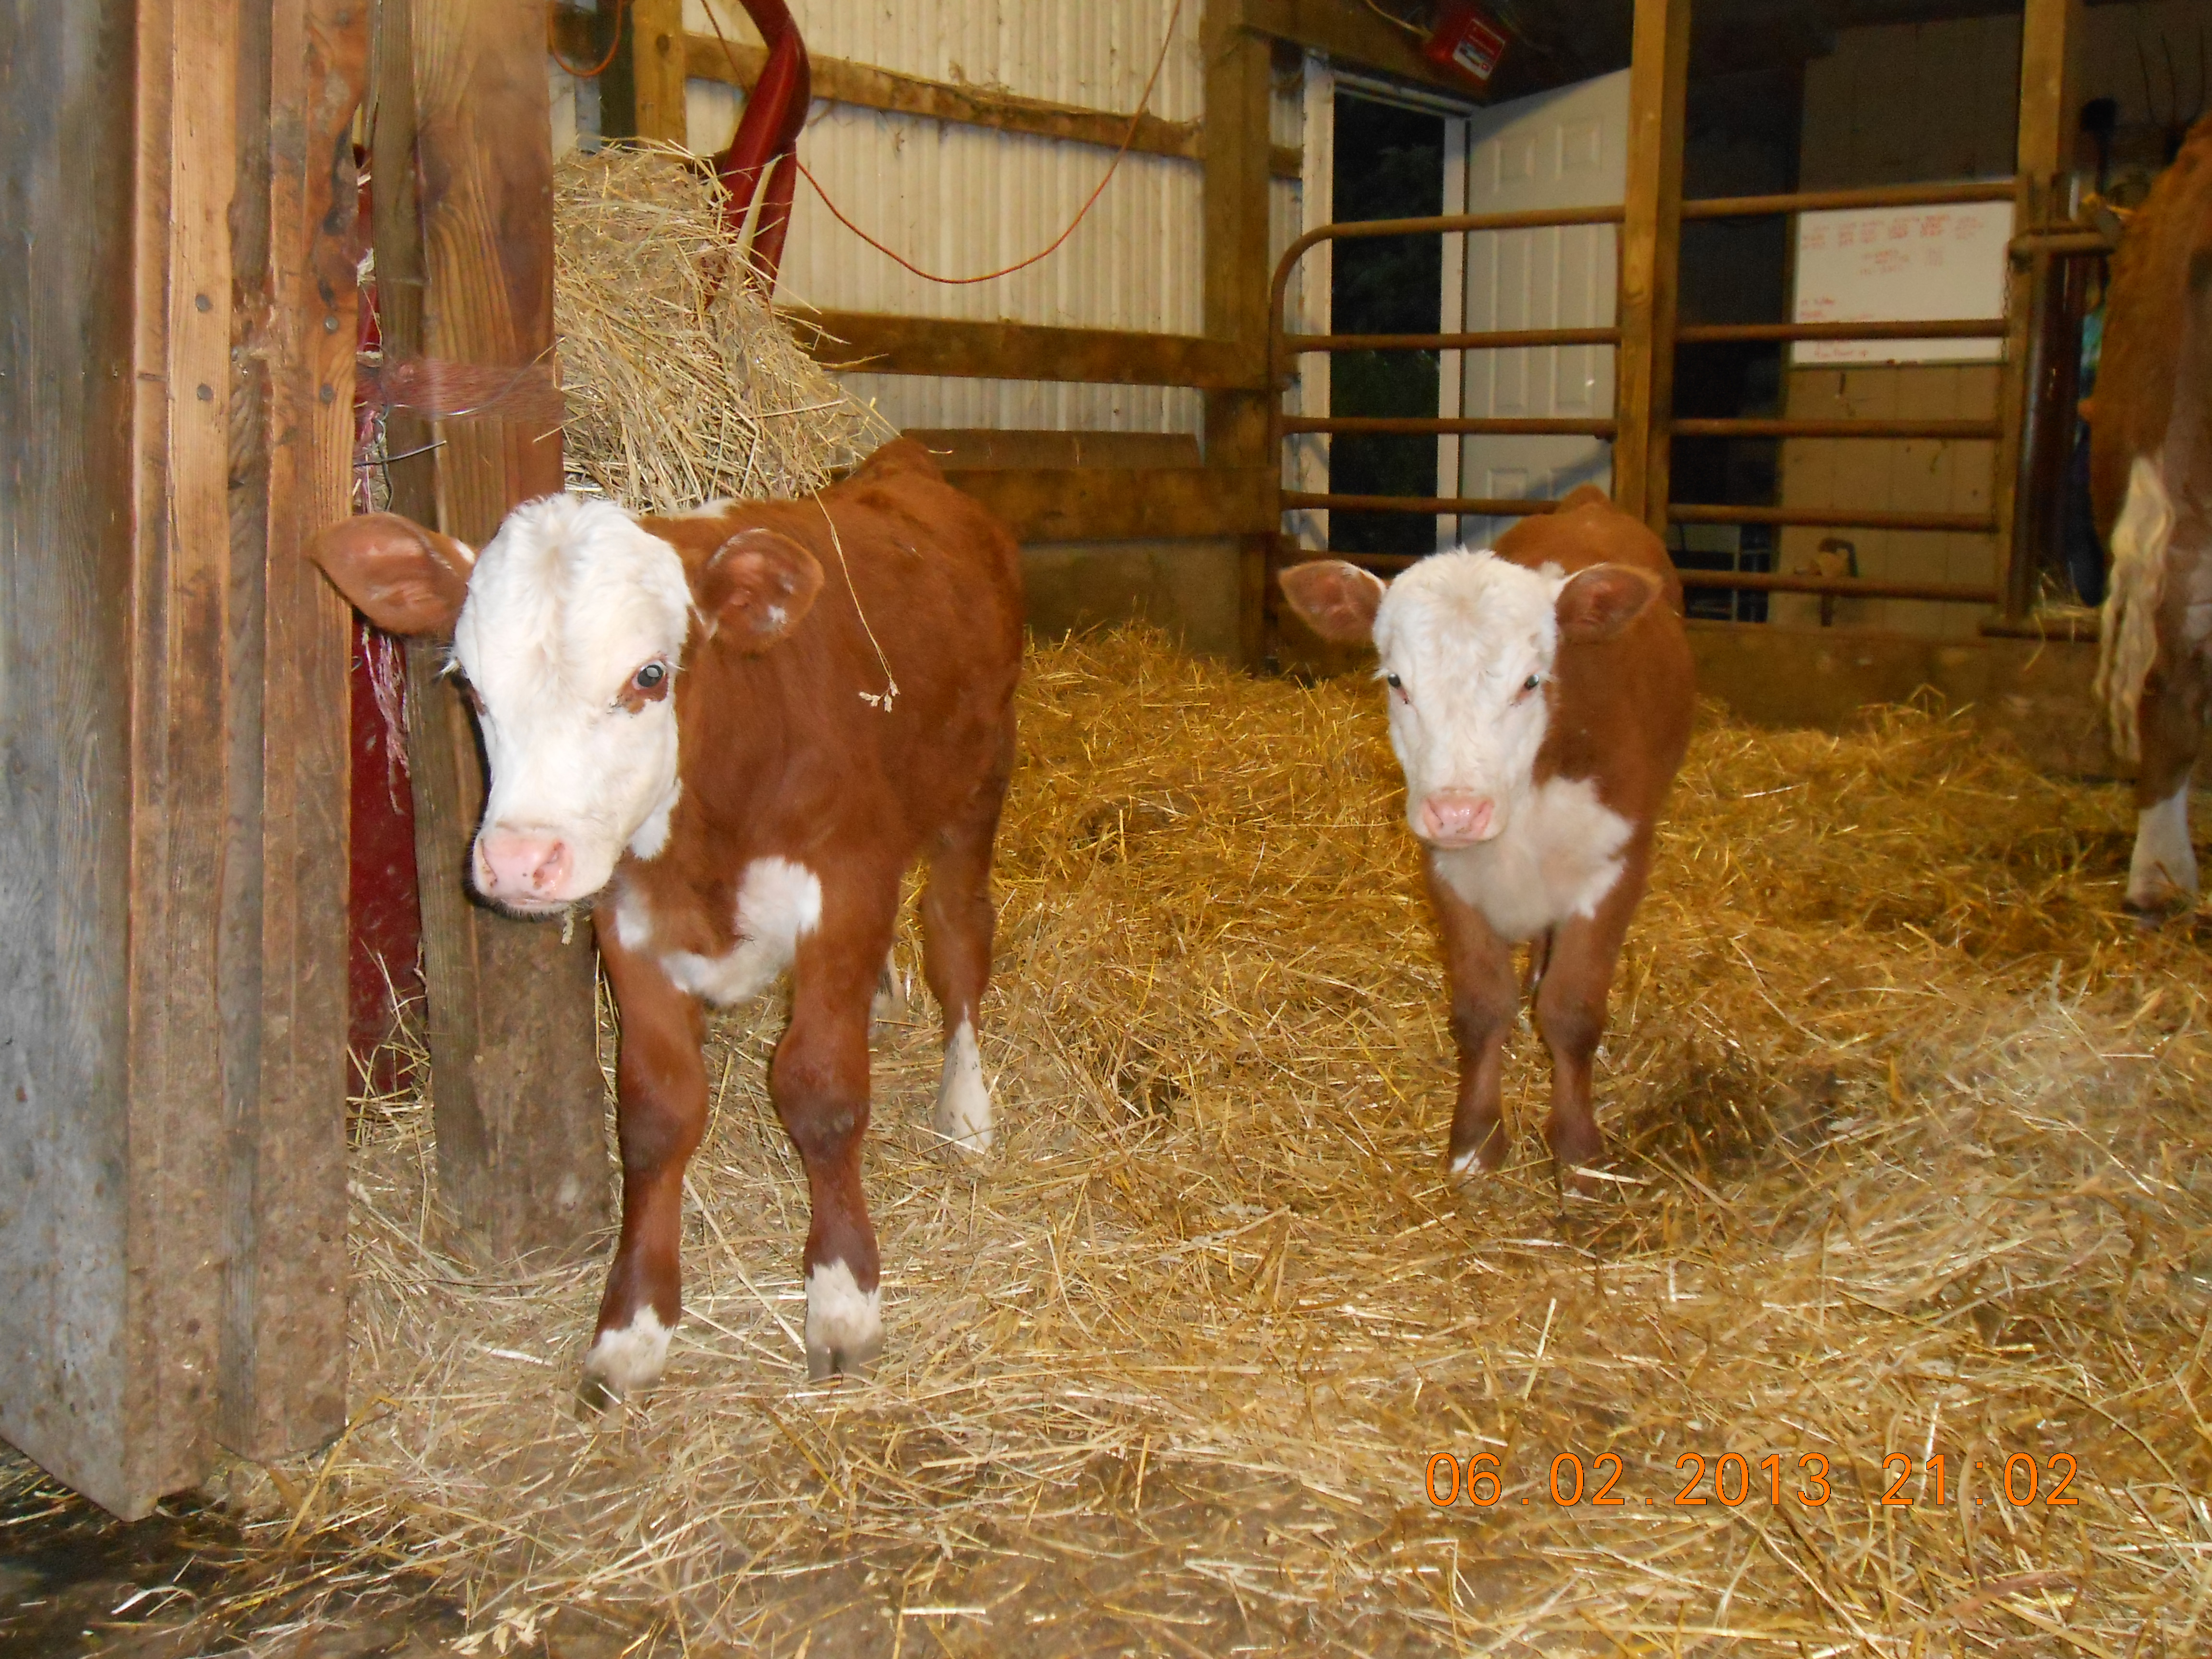 Two of the triplets, the bull, left, and one of the heifers, right.